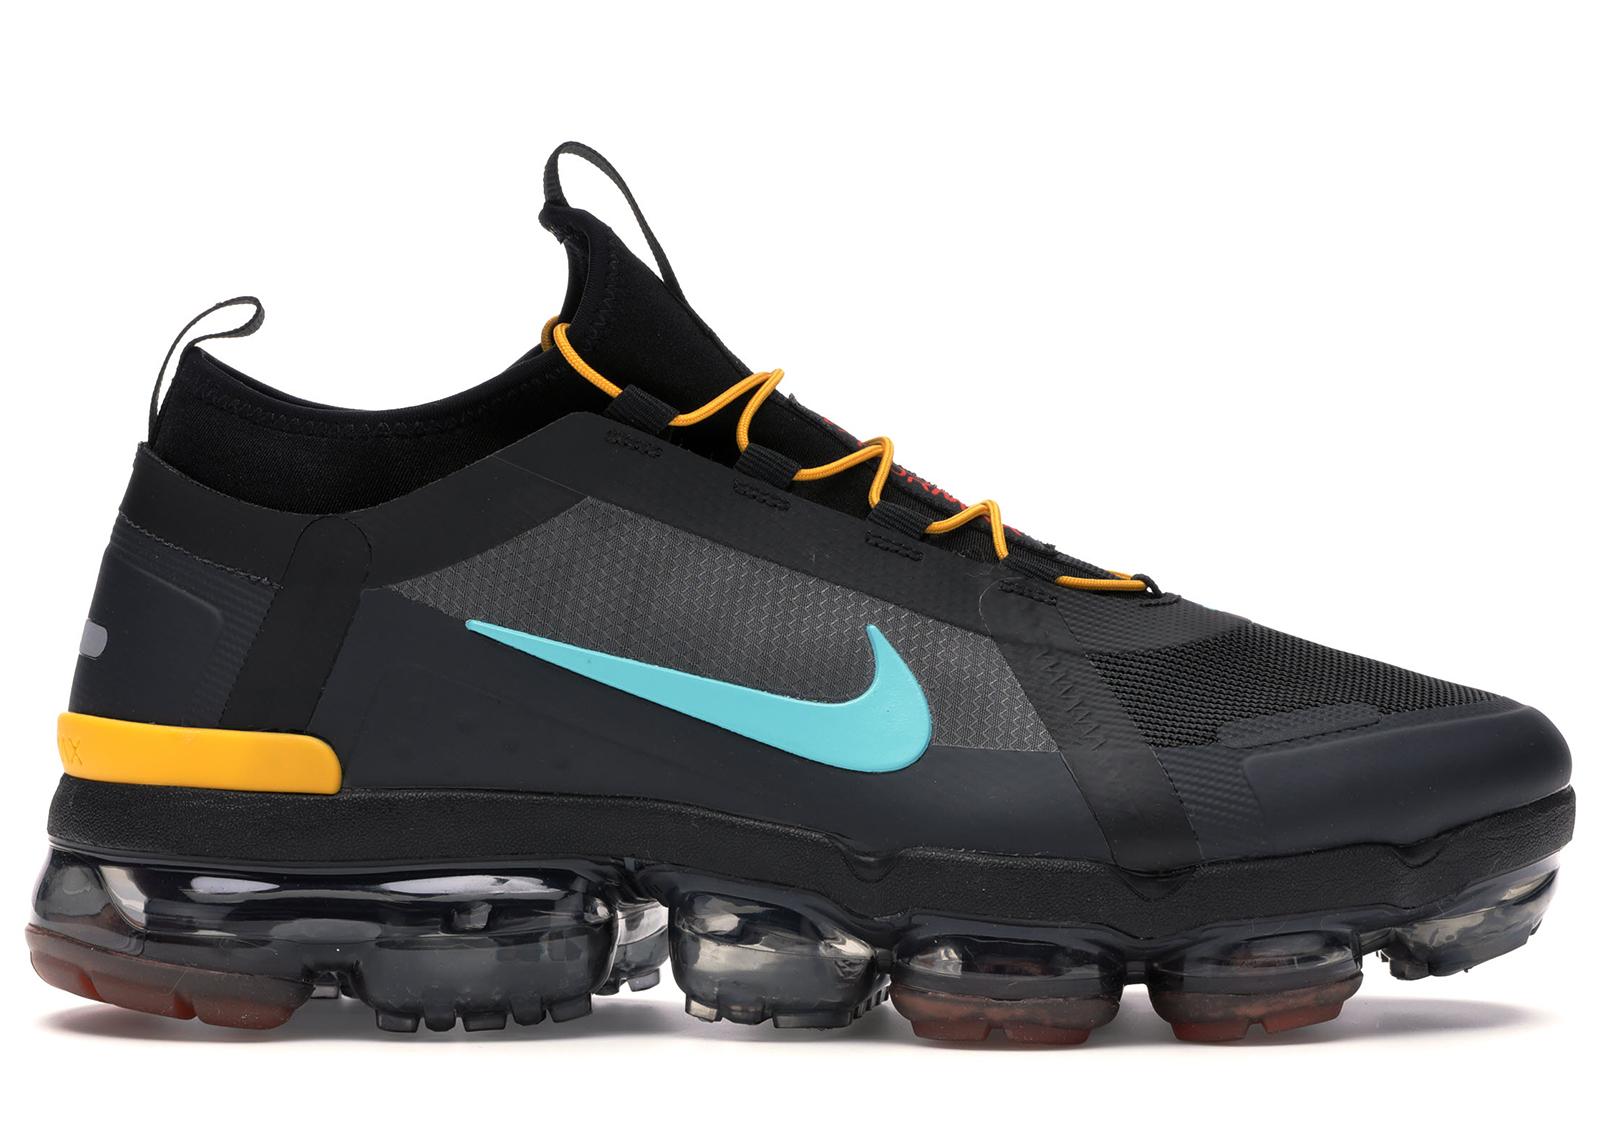 Nike Air Vapormax 2019 Utility in Black for Men - Save 35% - Lyst